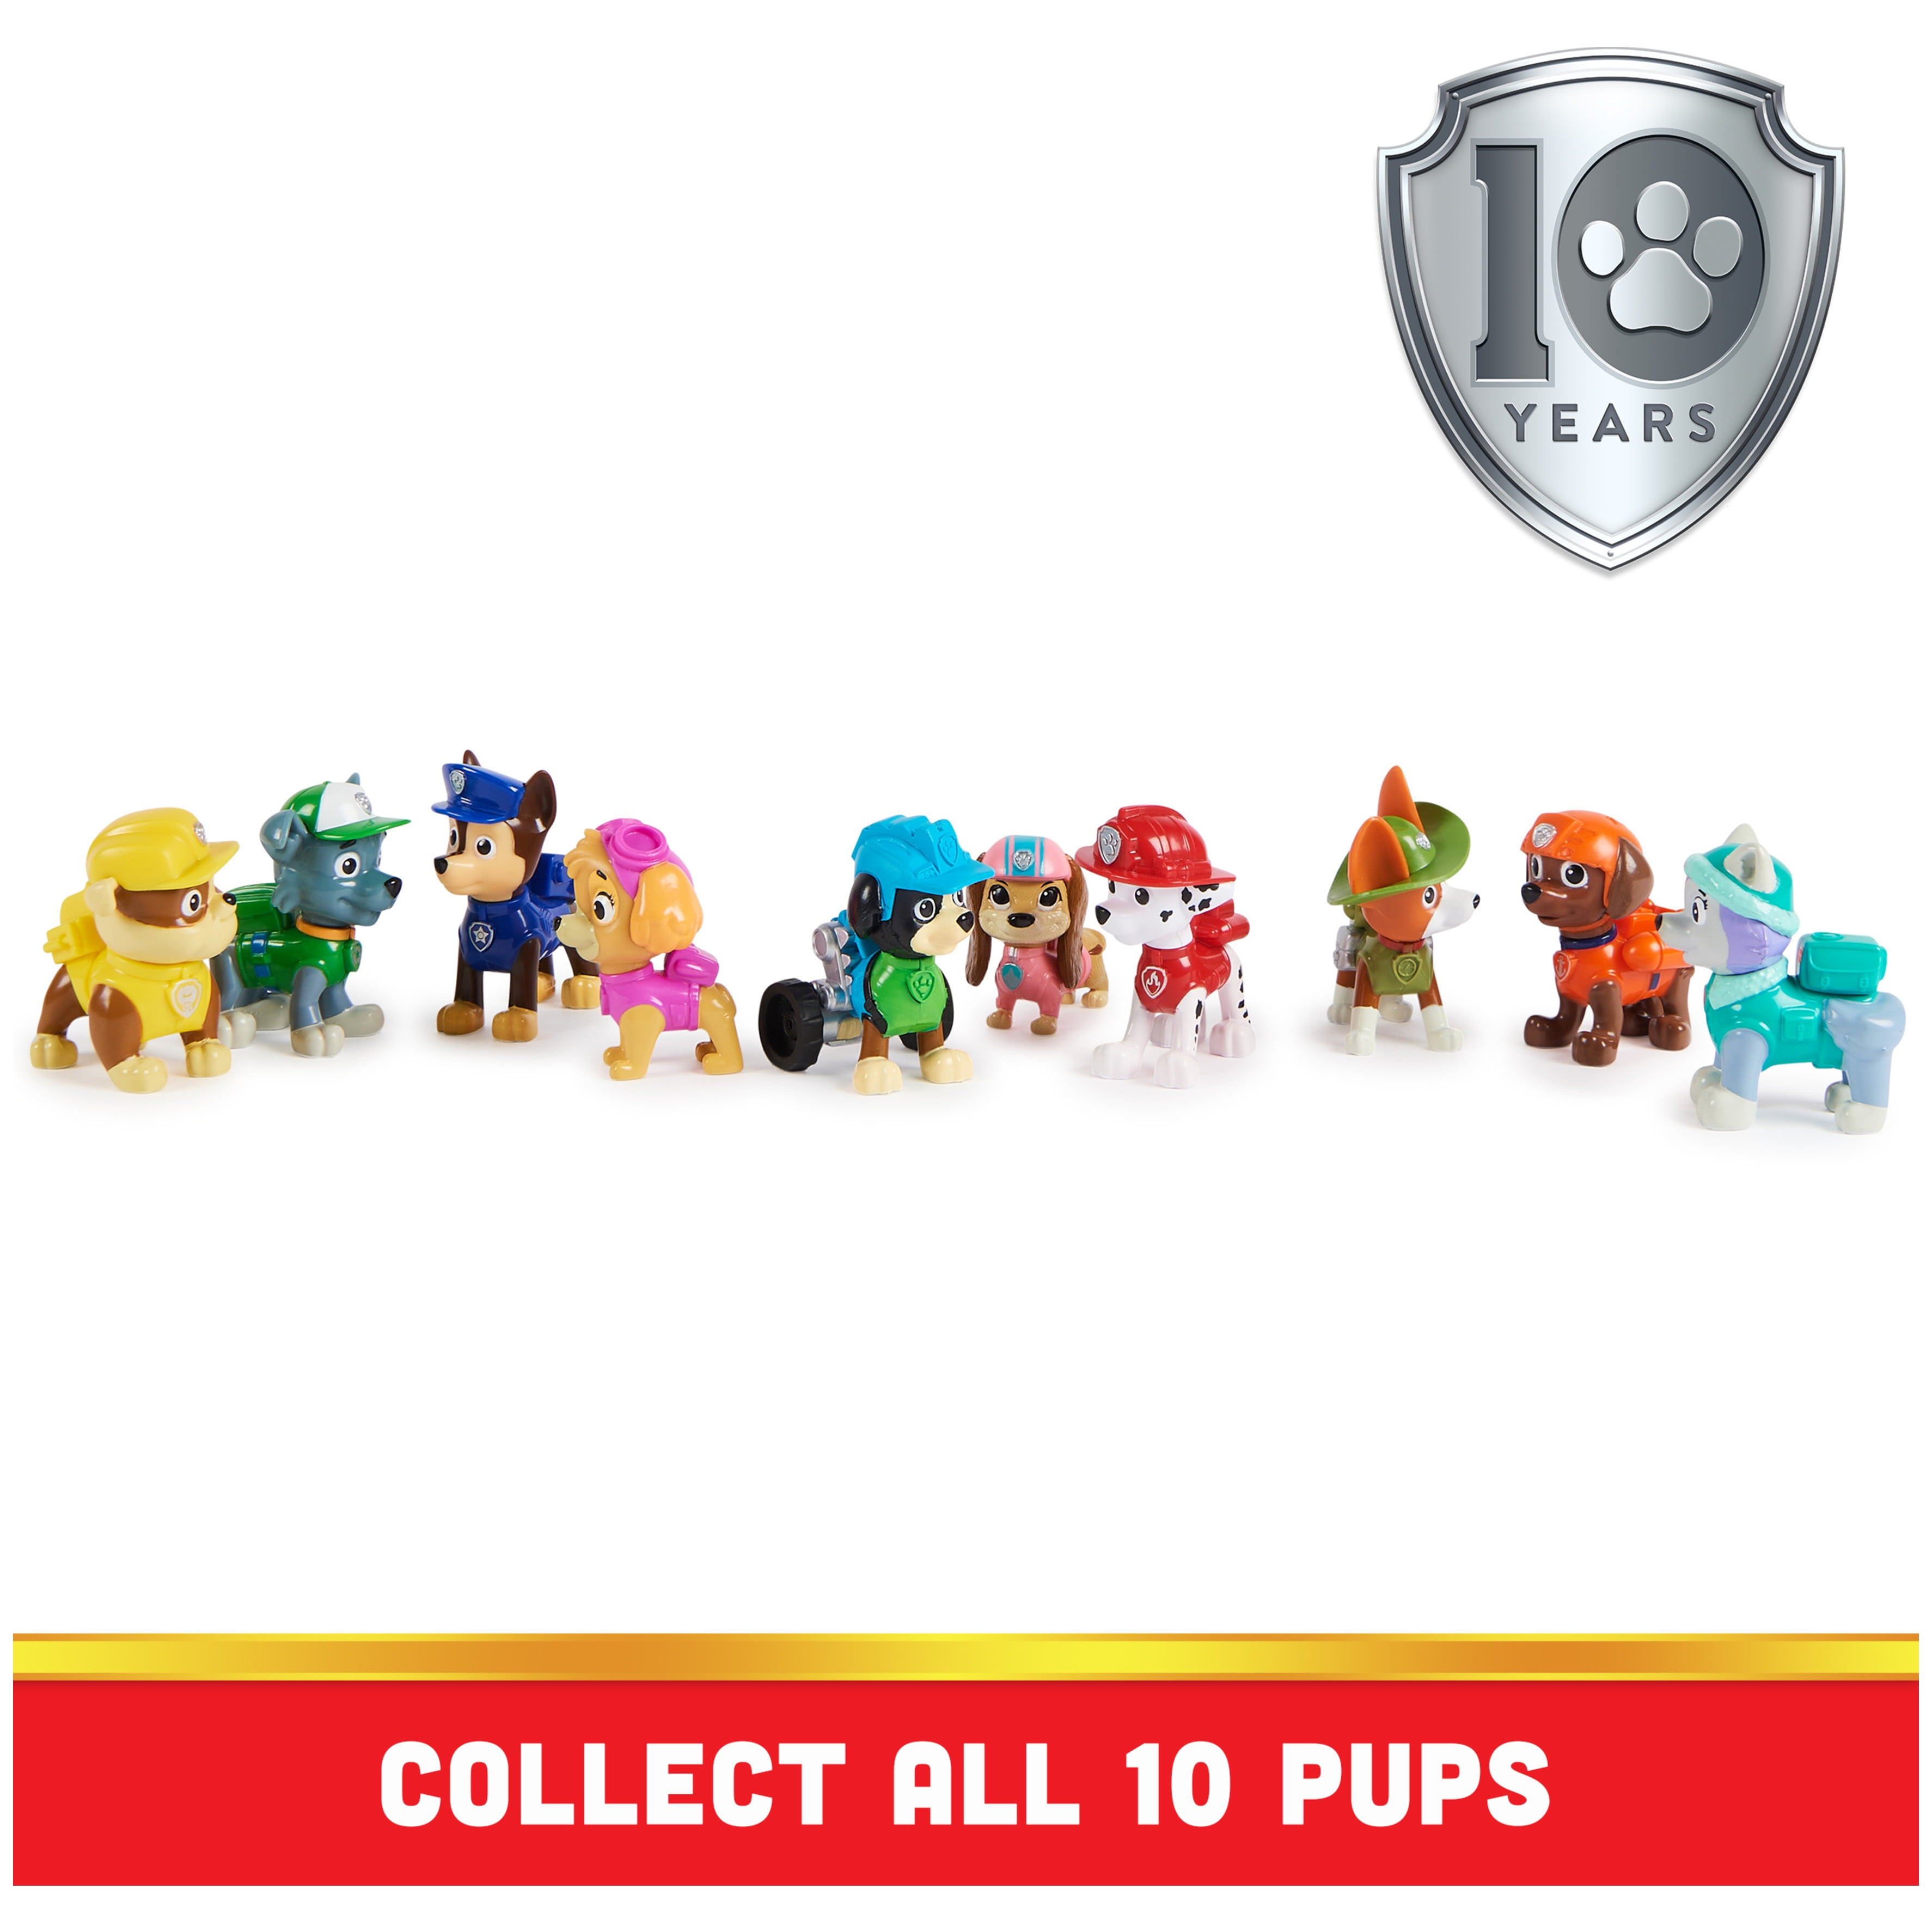 PAW Patrol, 10th Anniversary, All Paws On Deck 10 Collectible Toy Figures Gift Pack - 2